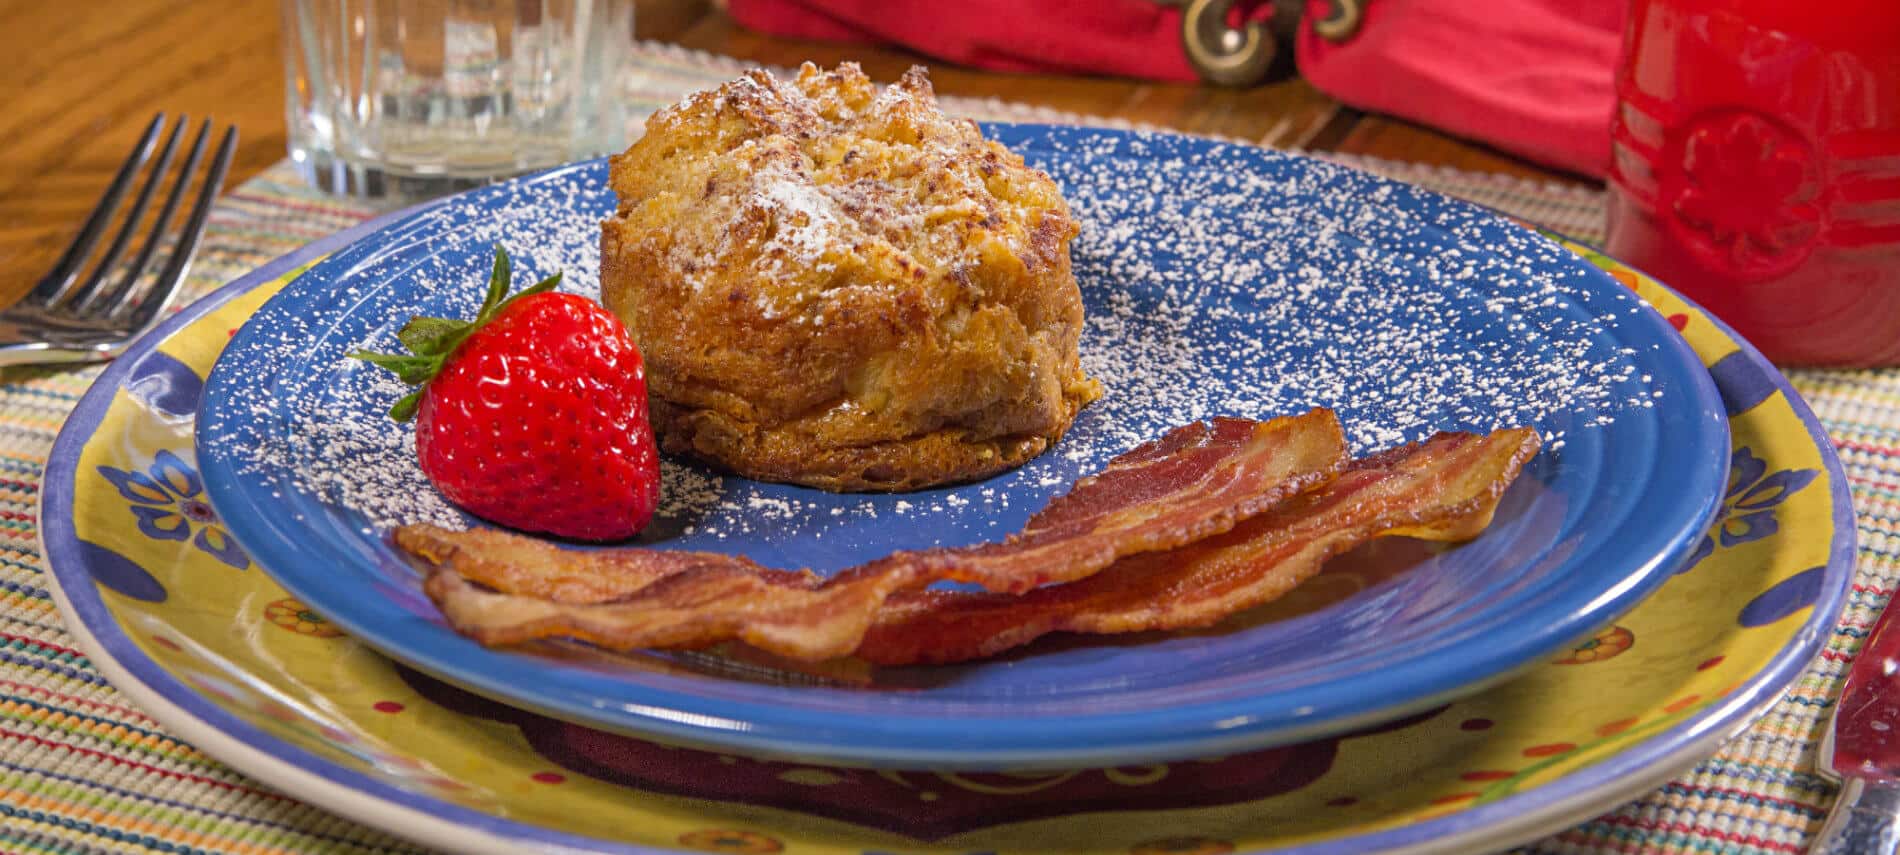 Blue ceramic plate on a colorful charger topped with bacon, red strawberry and baked french toast